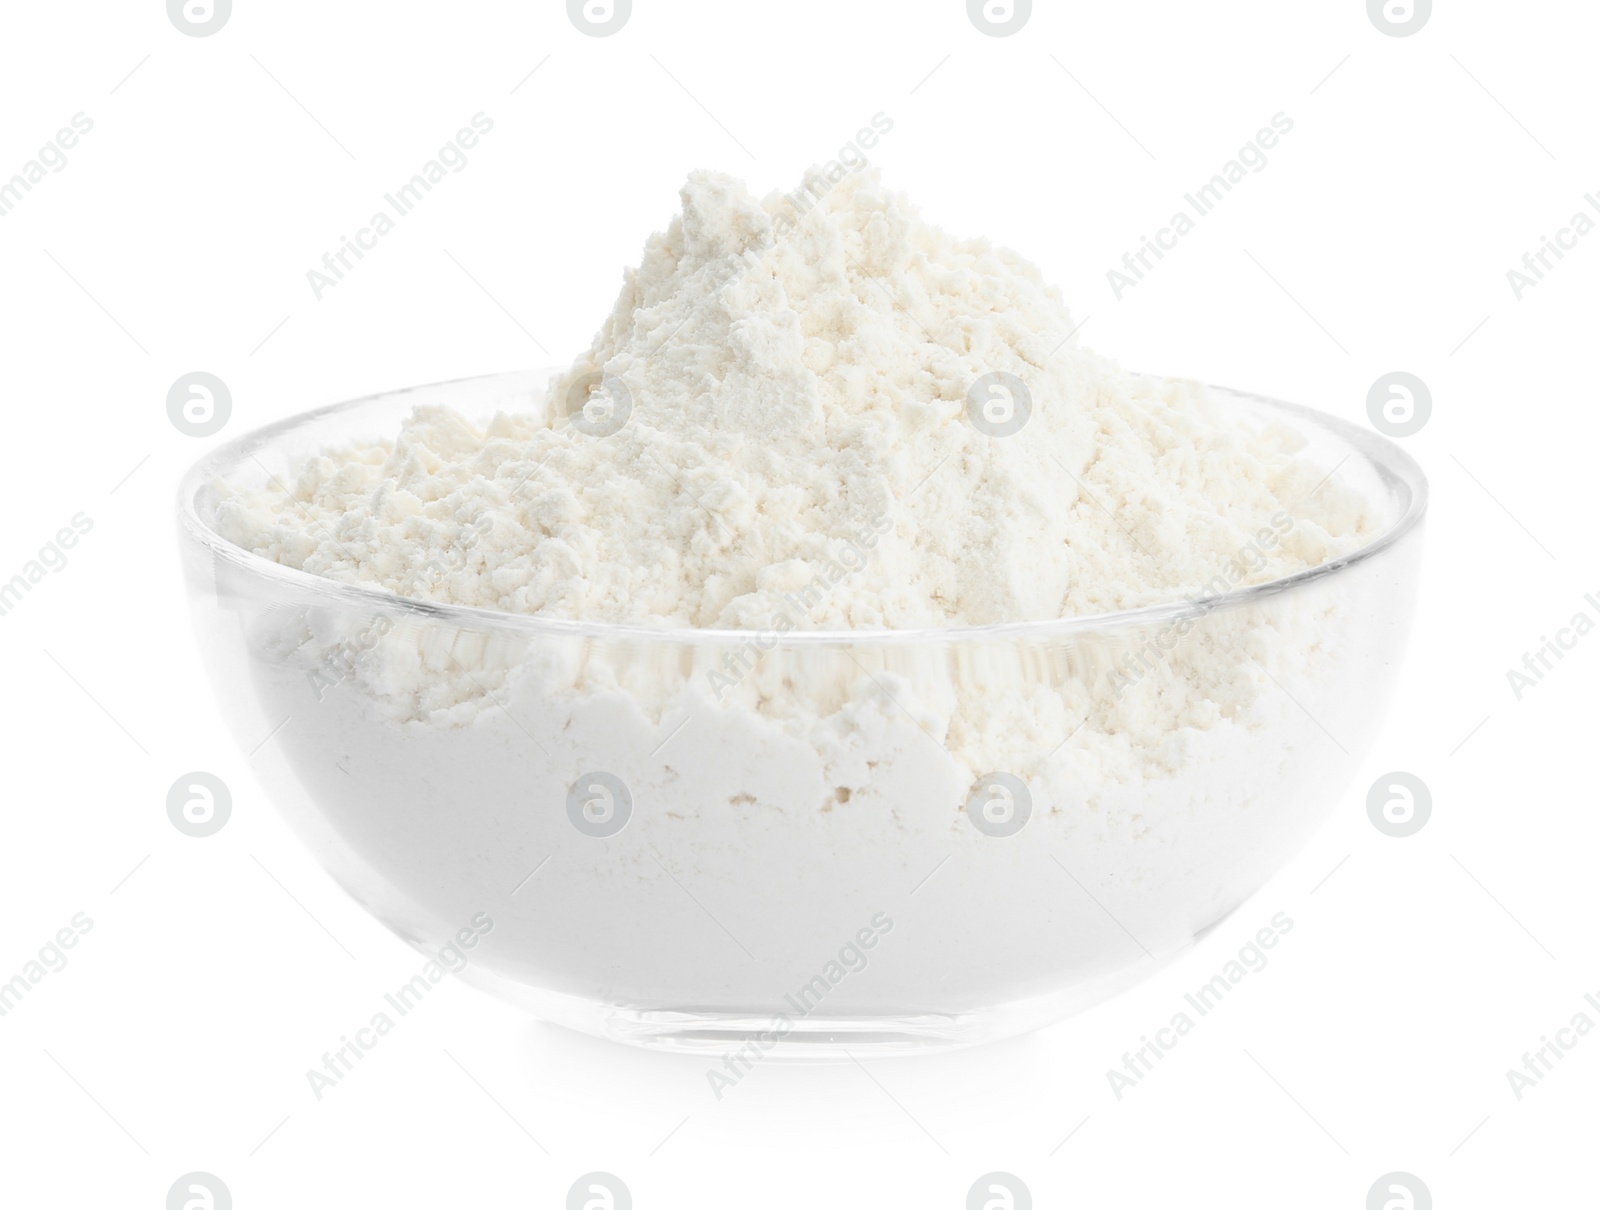 Photo of Organic flour in glass bowl isolated on white